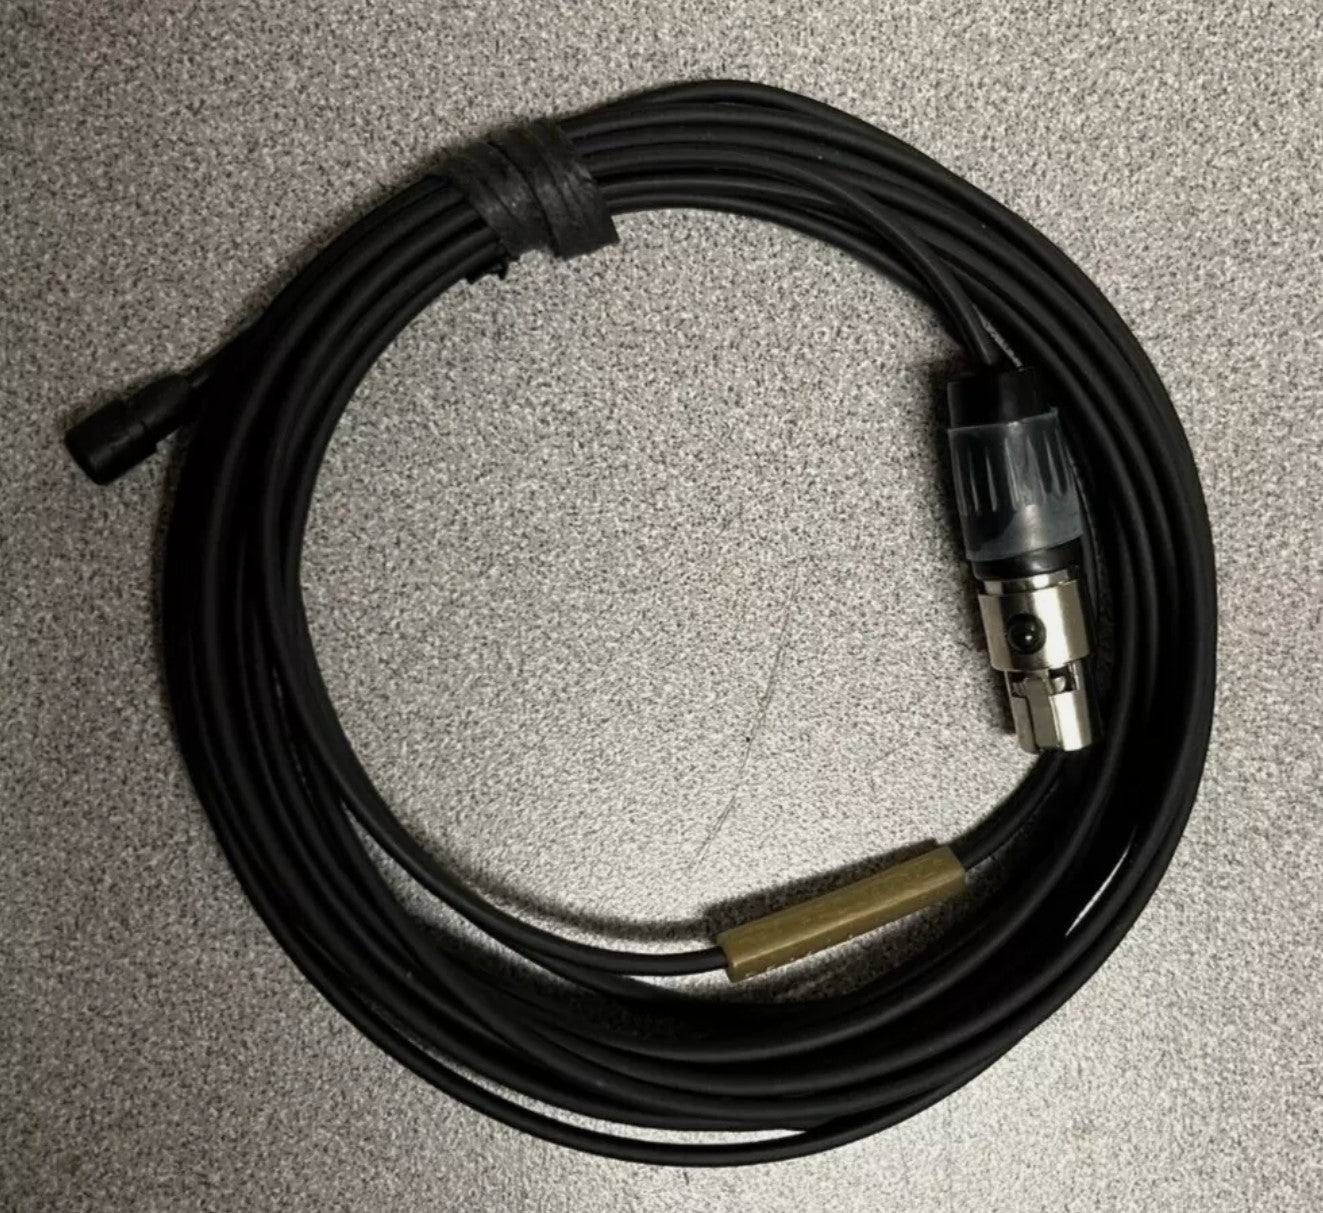 Used Sennheiser MKE2 GOLD Omni TA5F Lavalier Microphone for Sale. We Sell Professional Audio Equipment. Audio Systems, Amplifiers, Consoles, Mixers, Electronics, Entertainment and Live Sound.